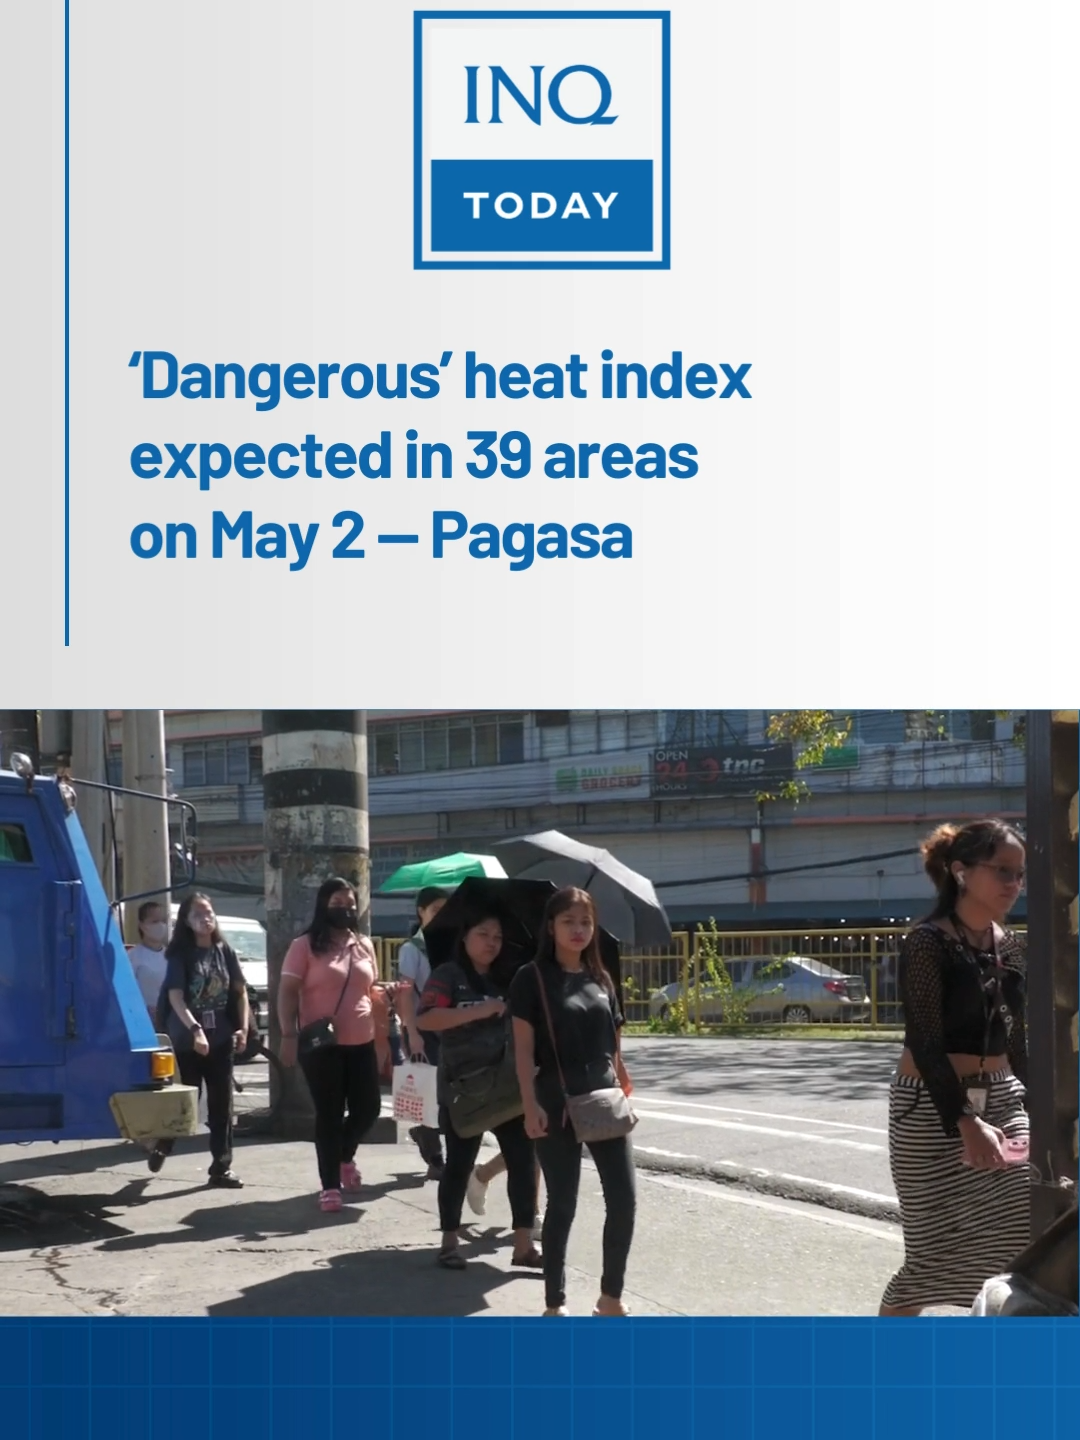 “Dangerous” levels of heat indexes are forecast over 39 areas across the country on Thursday, May 2. #TikTokNews #SocialNews #NewsPH #inquirerdotnet